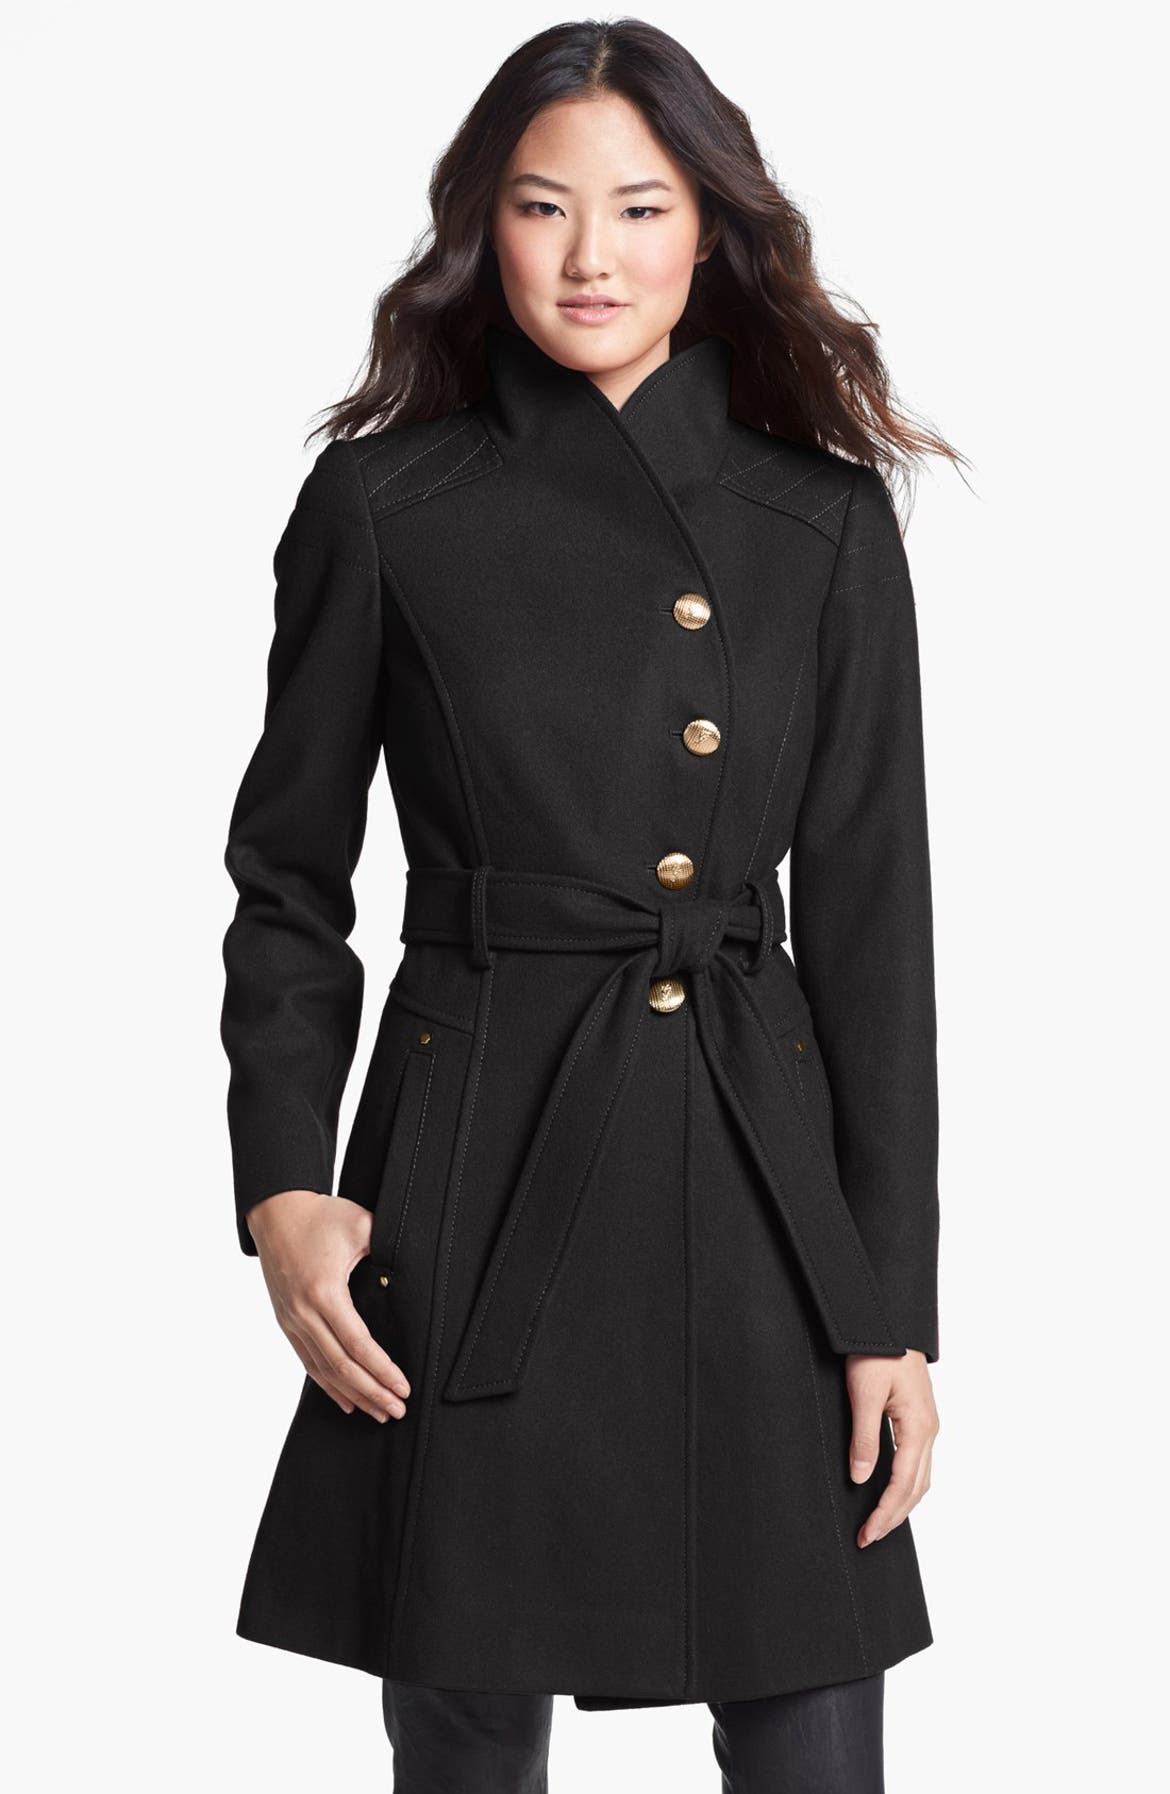 GUESS Belted Asymmetrical Wool Blend Coat | Nordstrom